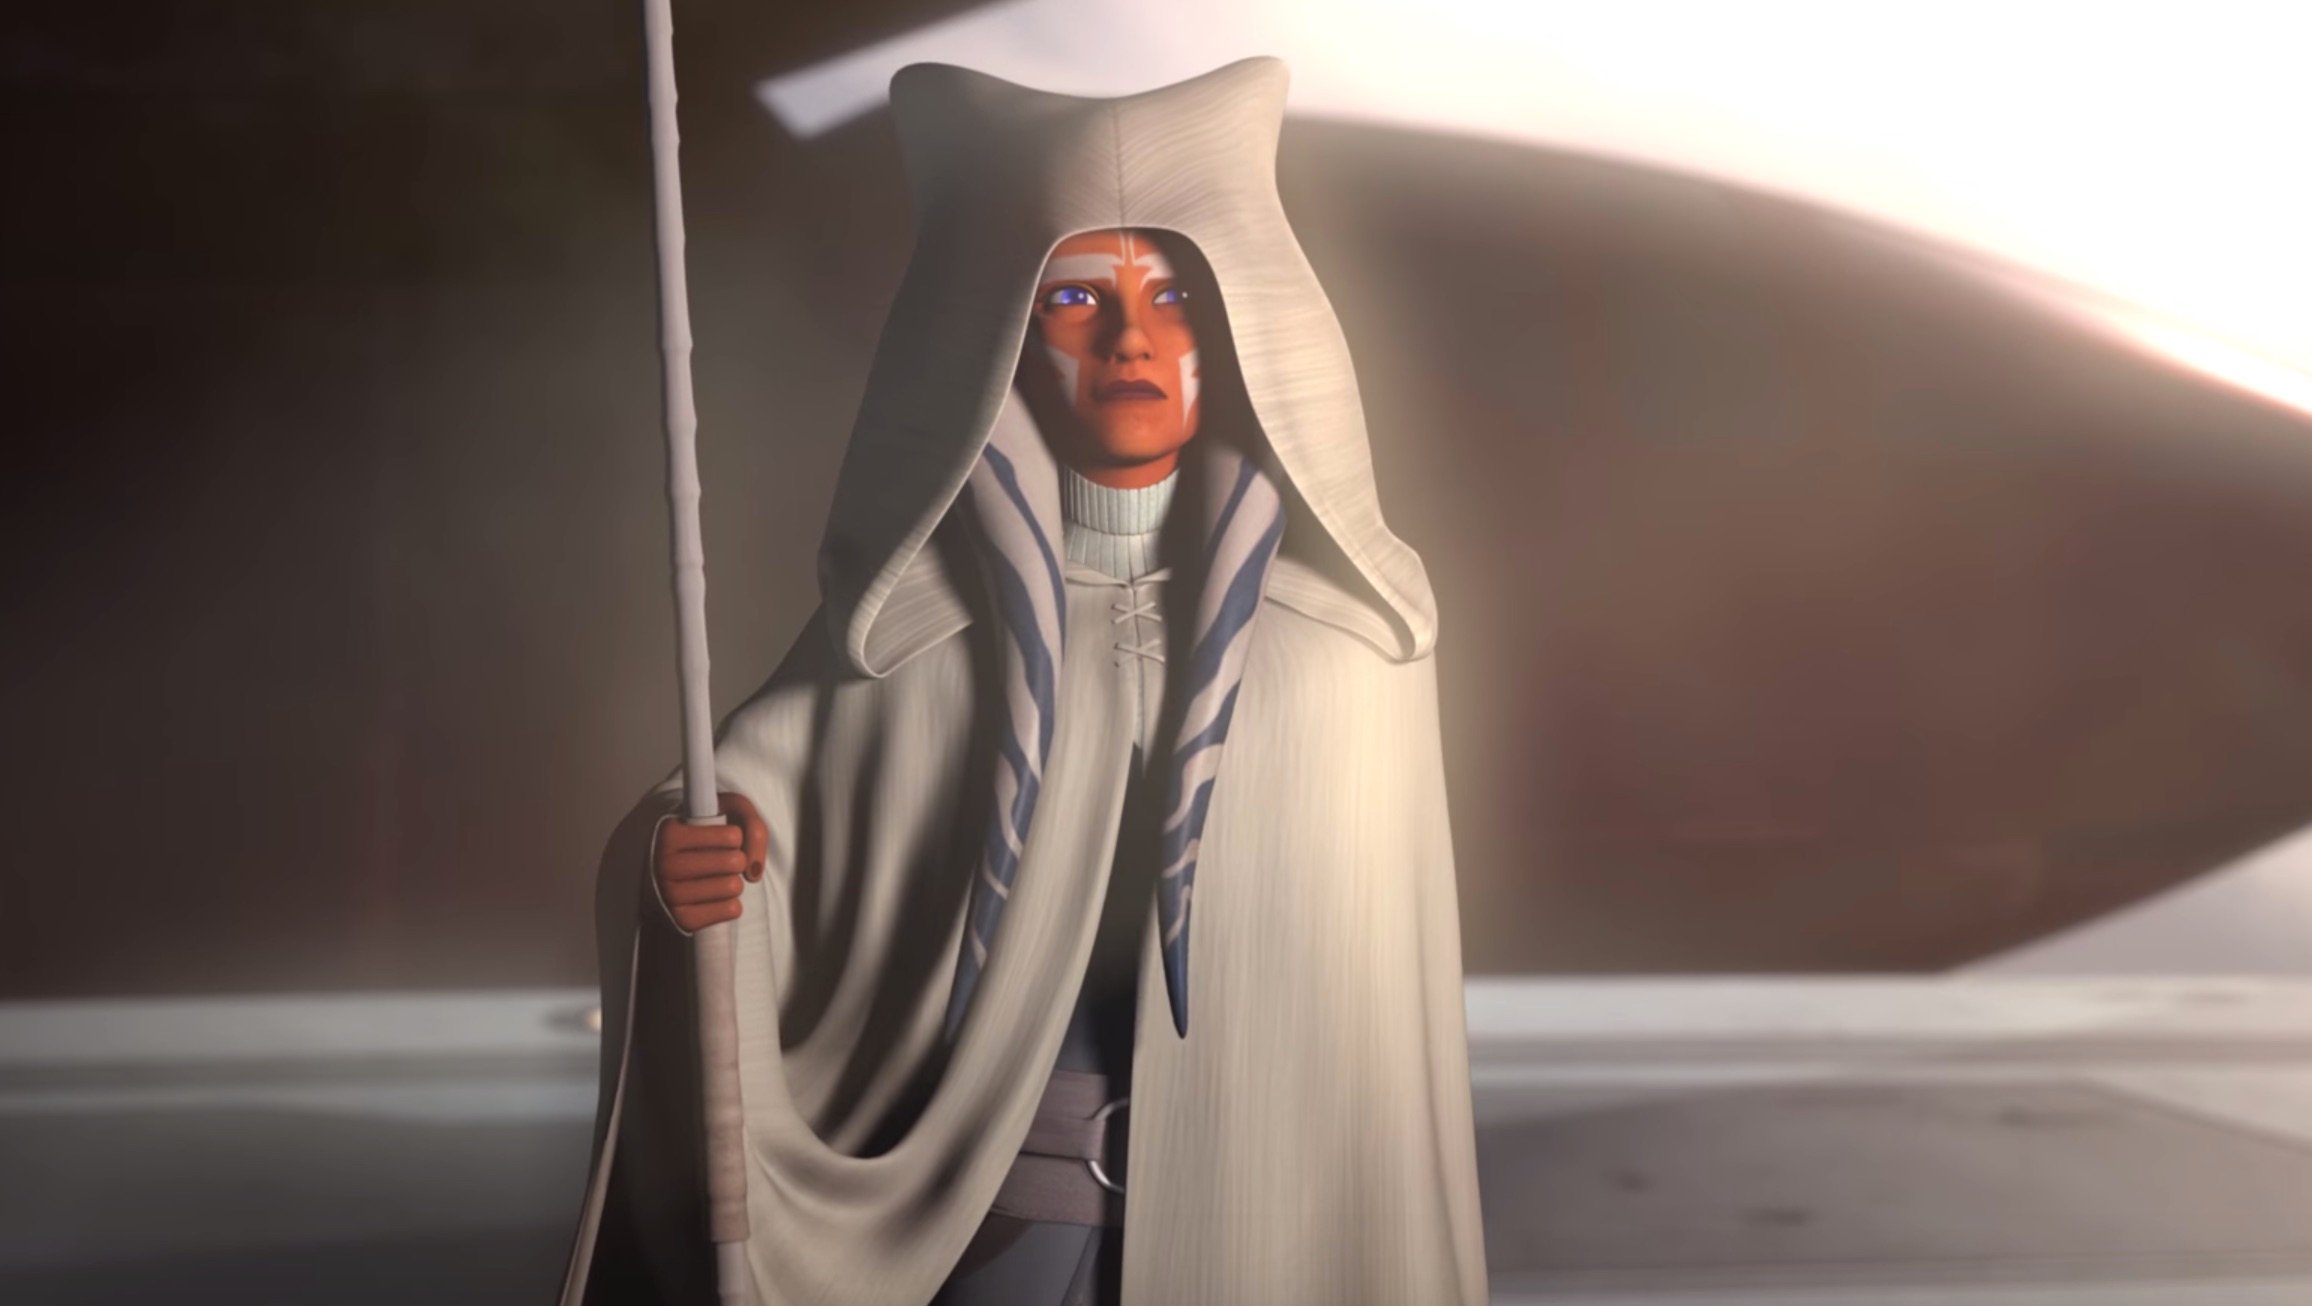 Could the Ahsoka Tano Series Show How She Transitions To Ahsoka the White? Rosario Dawson-Led Series Confirmed at Disney+